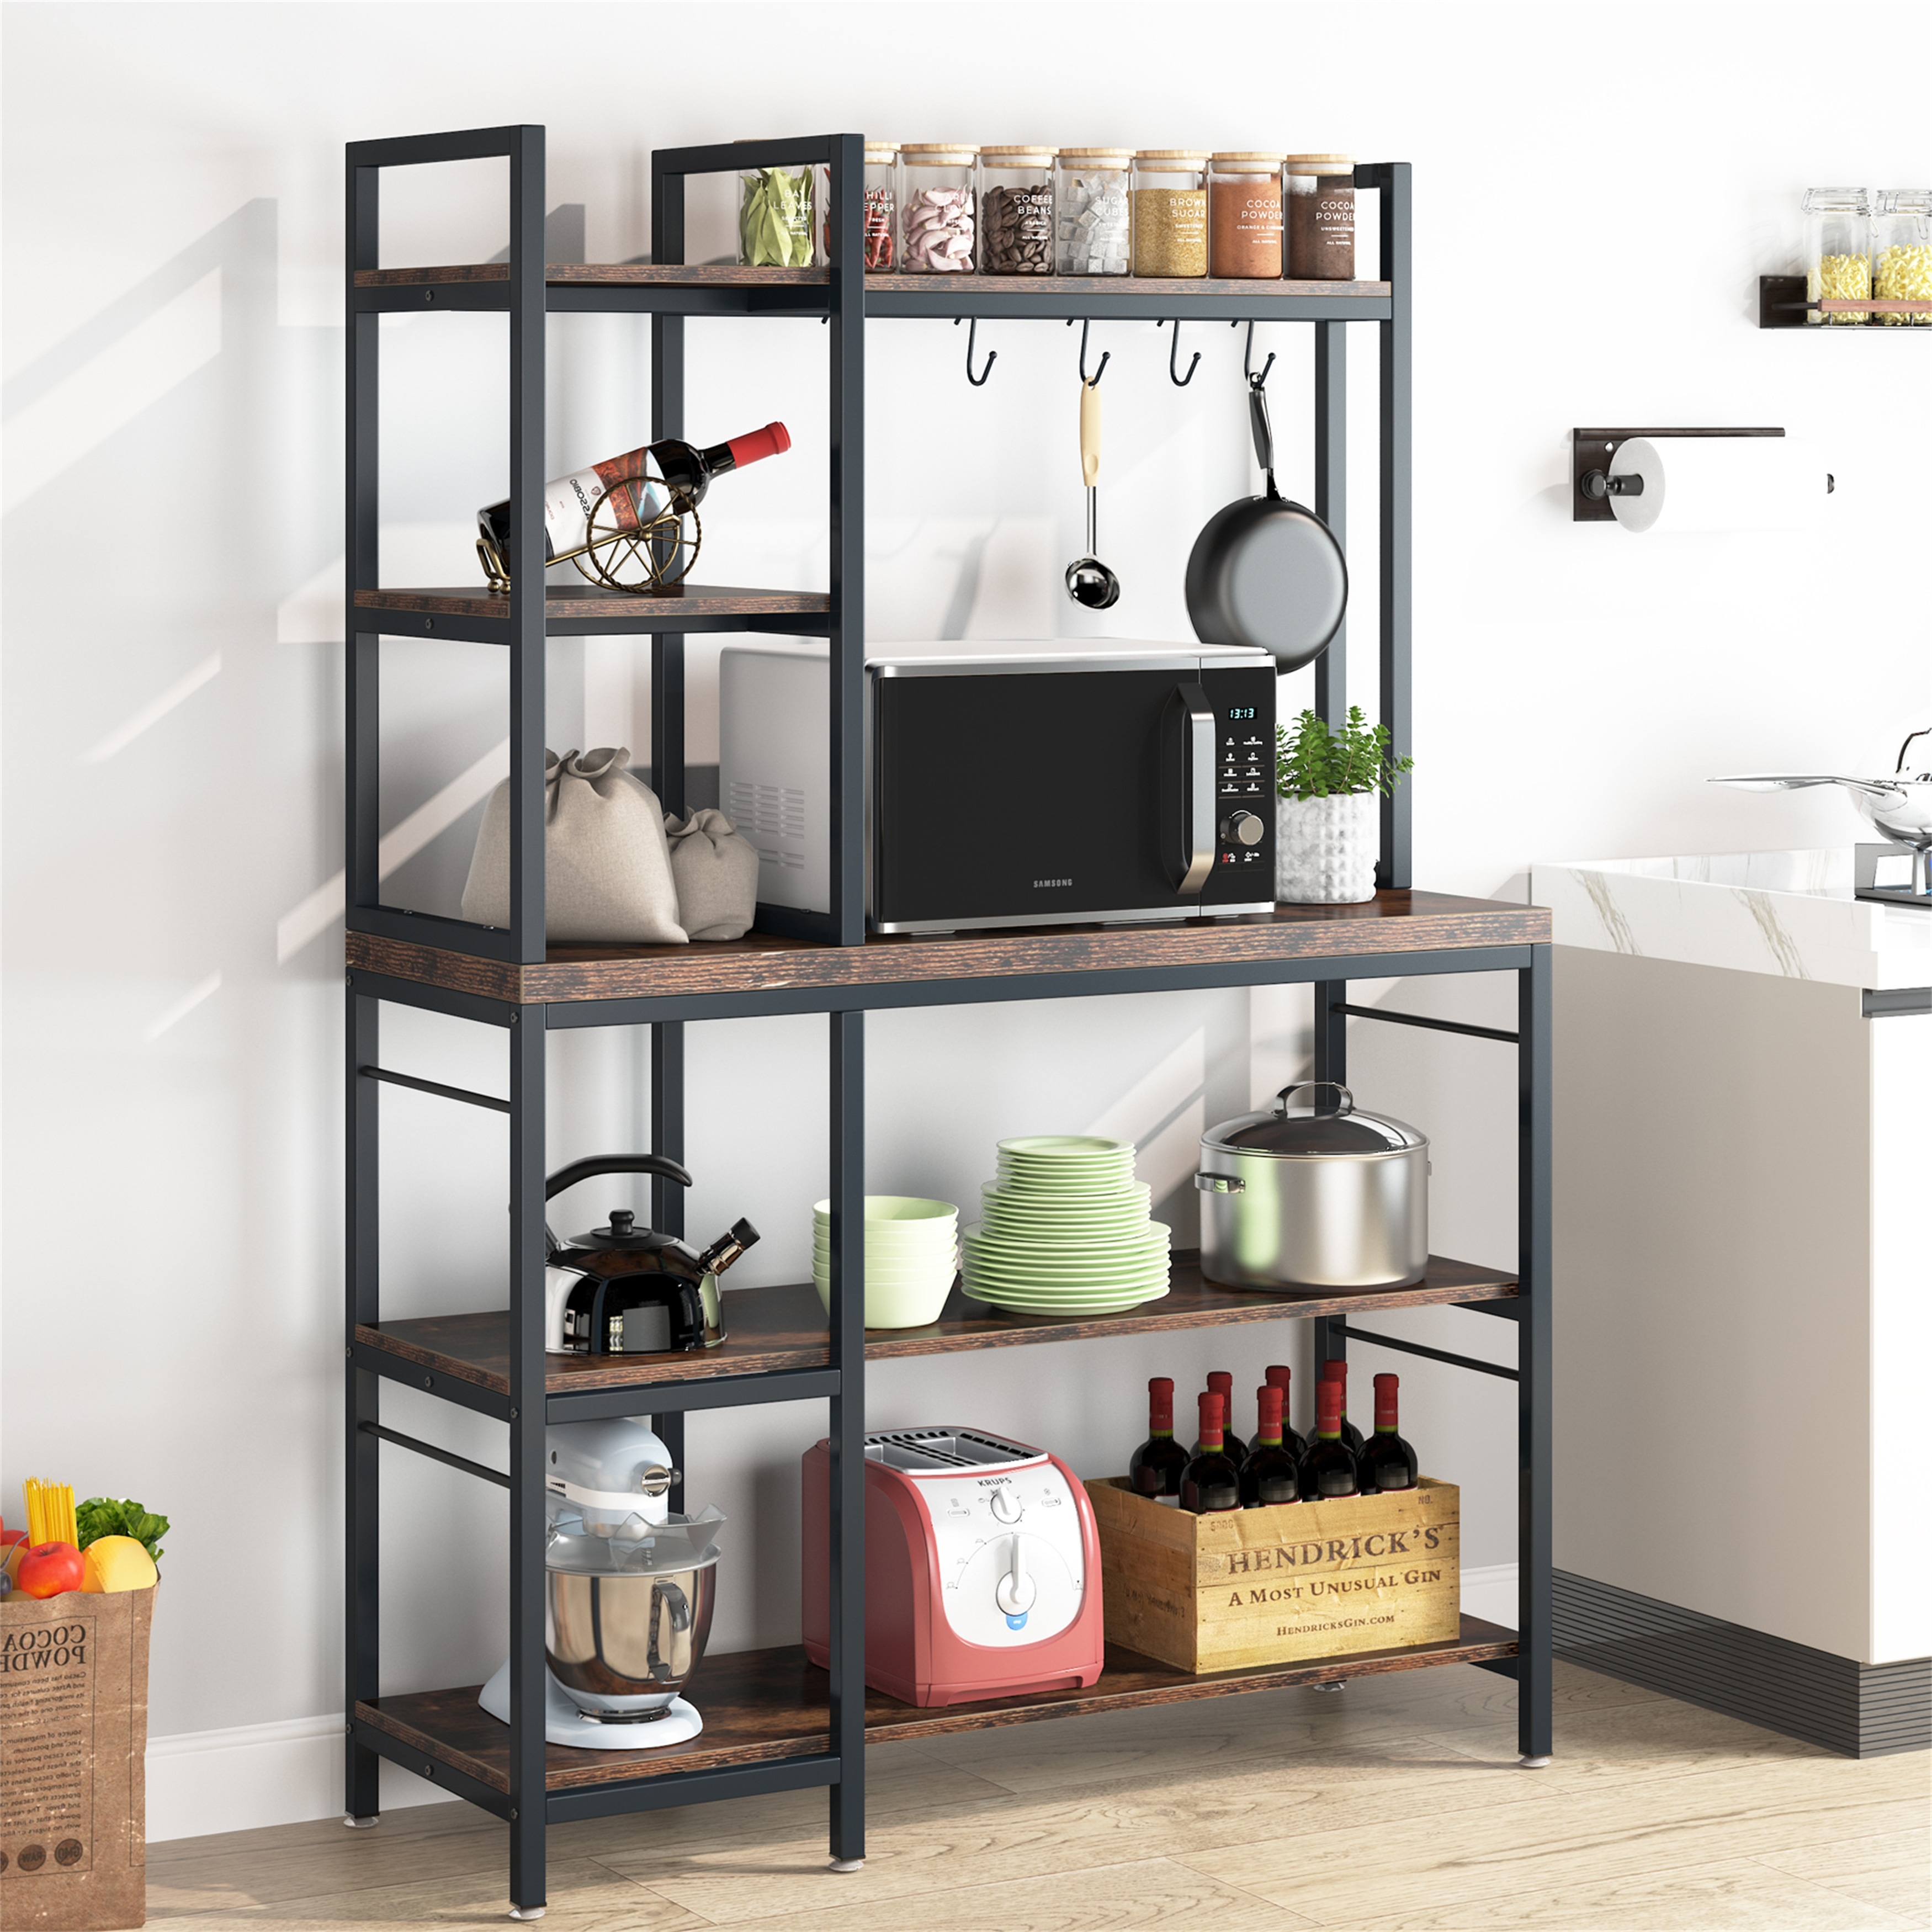 https://ak1.ostkcdn.com/images/products/is/images/direct/6d4c0ef66eb423348fc0f86fffbd1f7899c8ee10/Bakers-Rack%2C-Kitchen-Organizer-Shelves%2C-Microwave-Oven-Stand%2C-5-Tier-Kitchen-Utility-Storage-Shelf.jpg